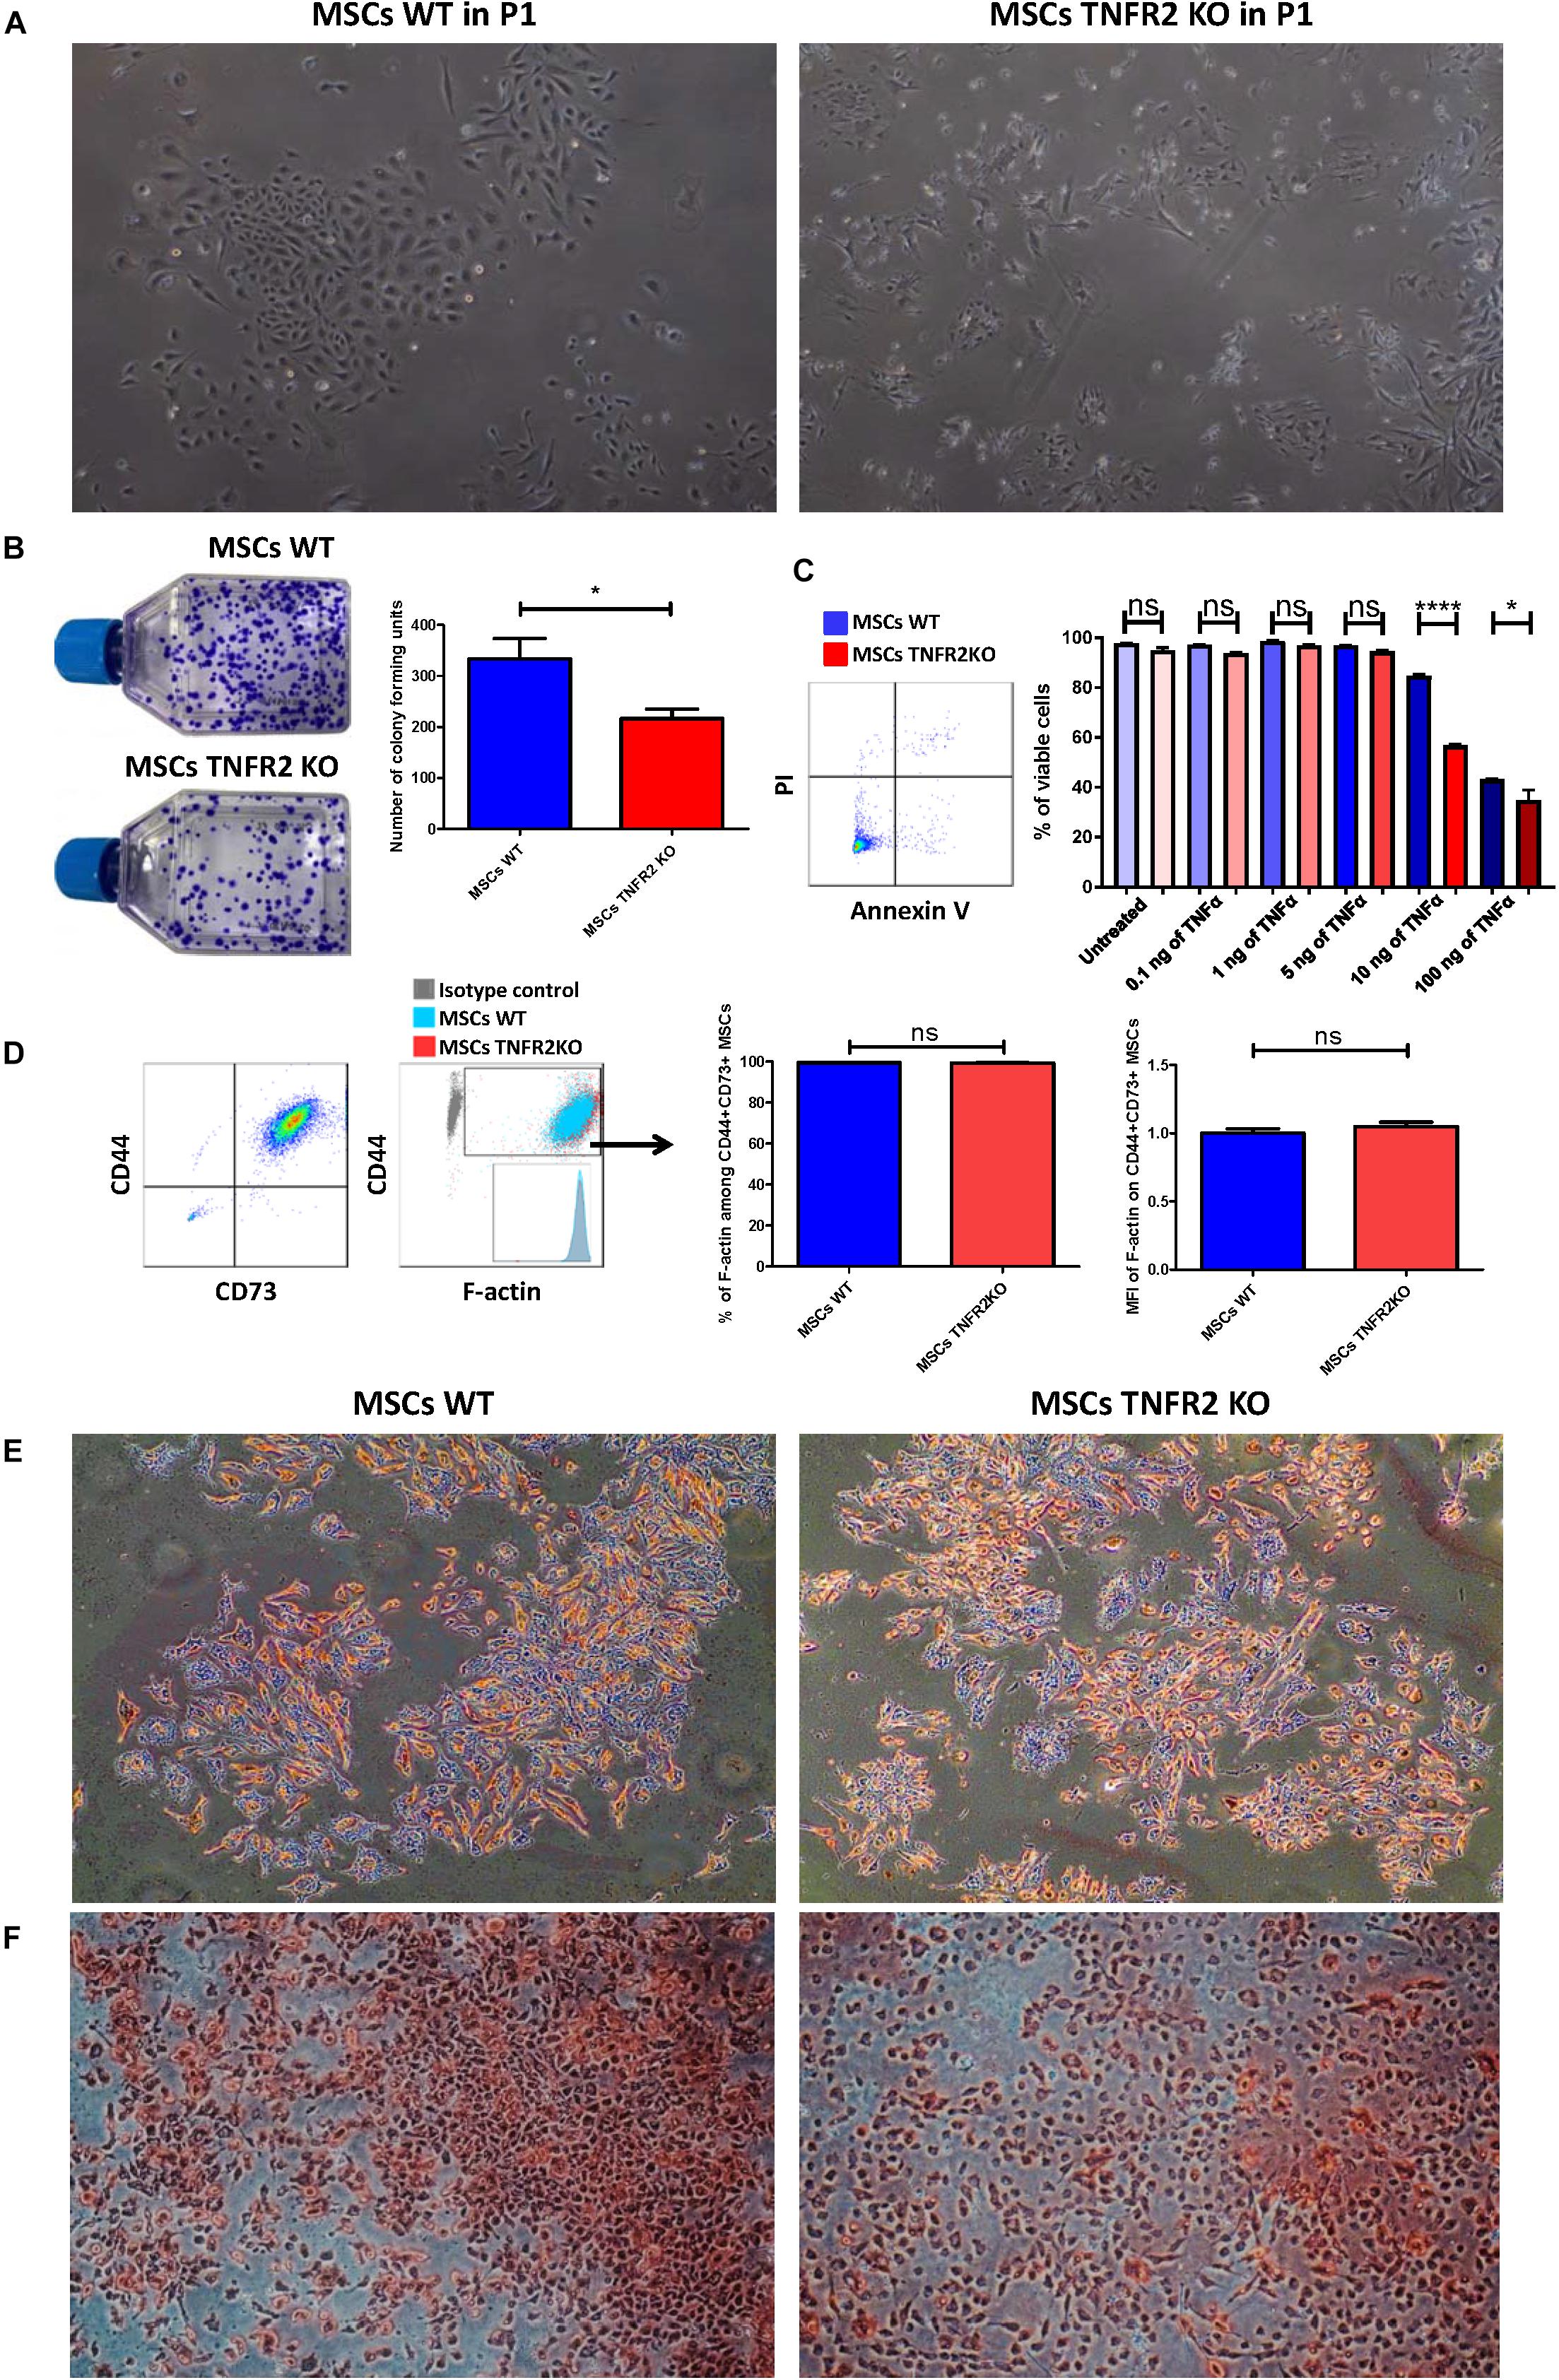 Frontiers Tnfr2 Is A Crucial Hub Controlling Mesenchymal Stem Cell Biological And Functional Properties Cell And Developmental Biology